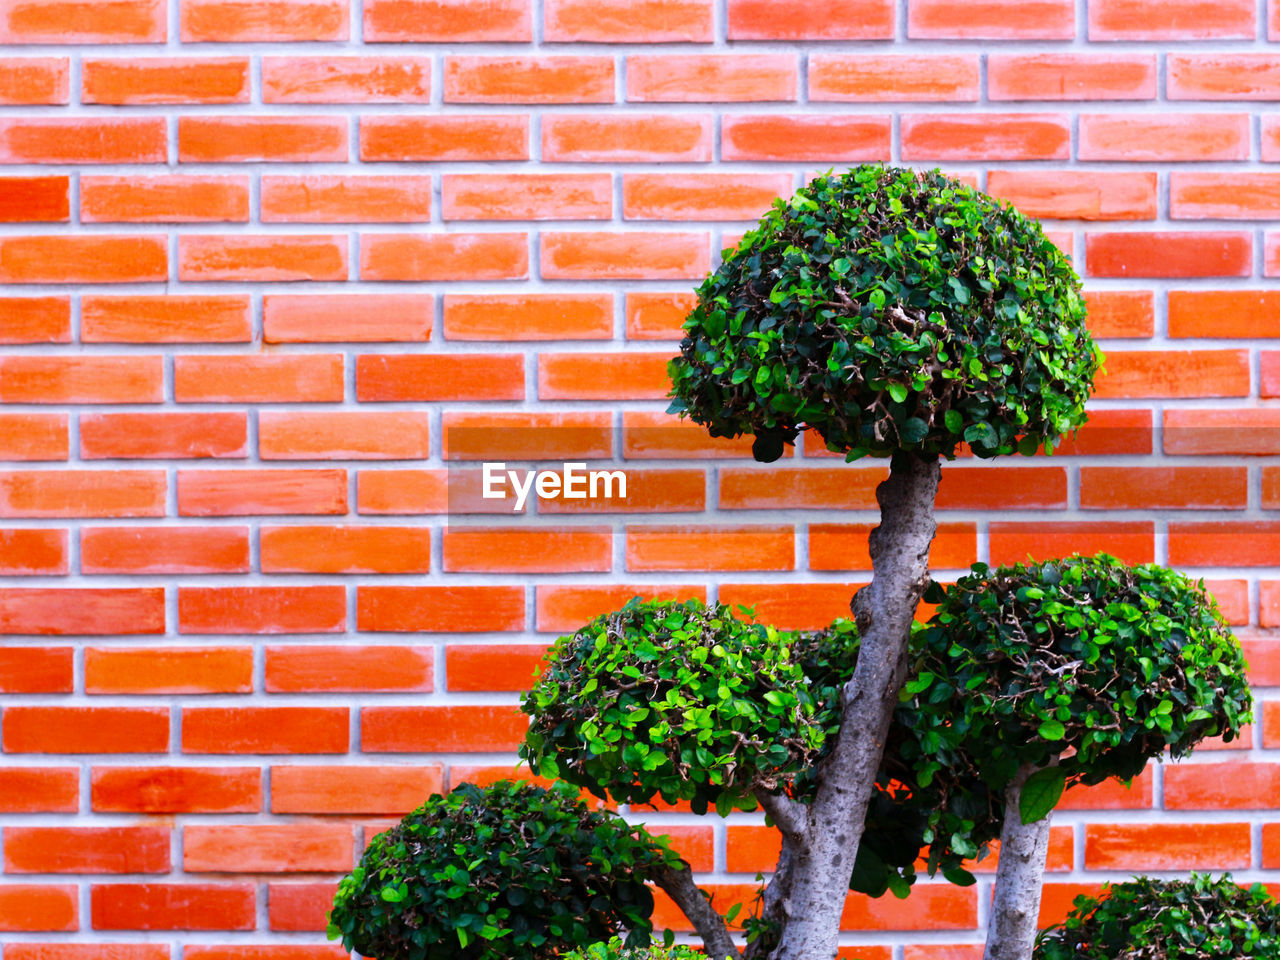 POTTED PLANT AGAINST BRICK WALL